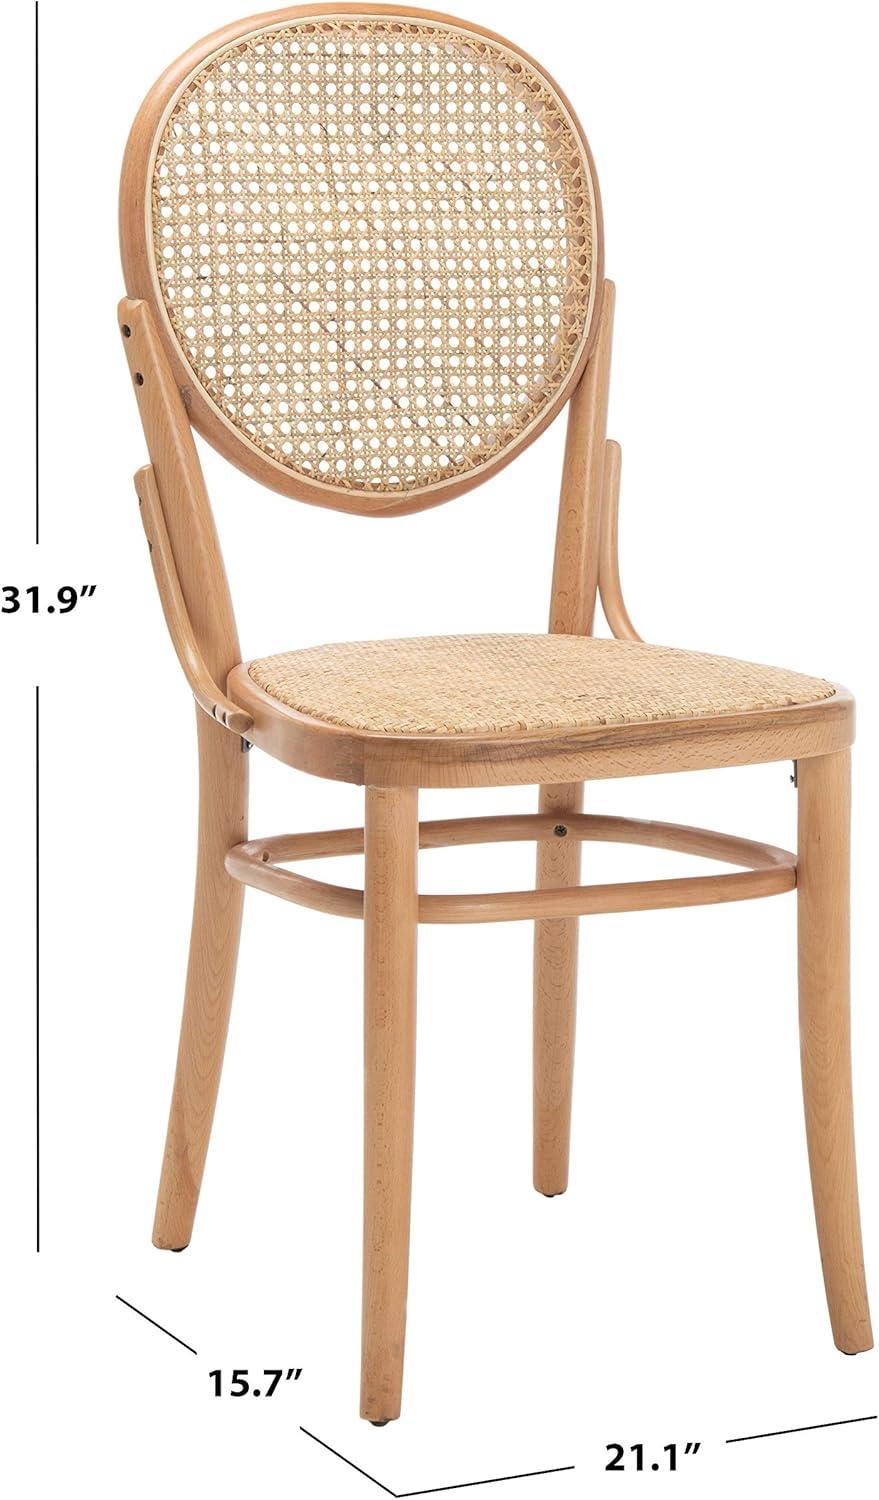 Elegant Transitional Natural Cane and Wood Side Chair